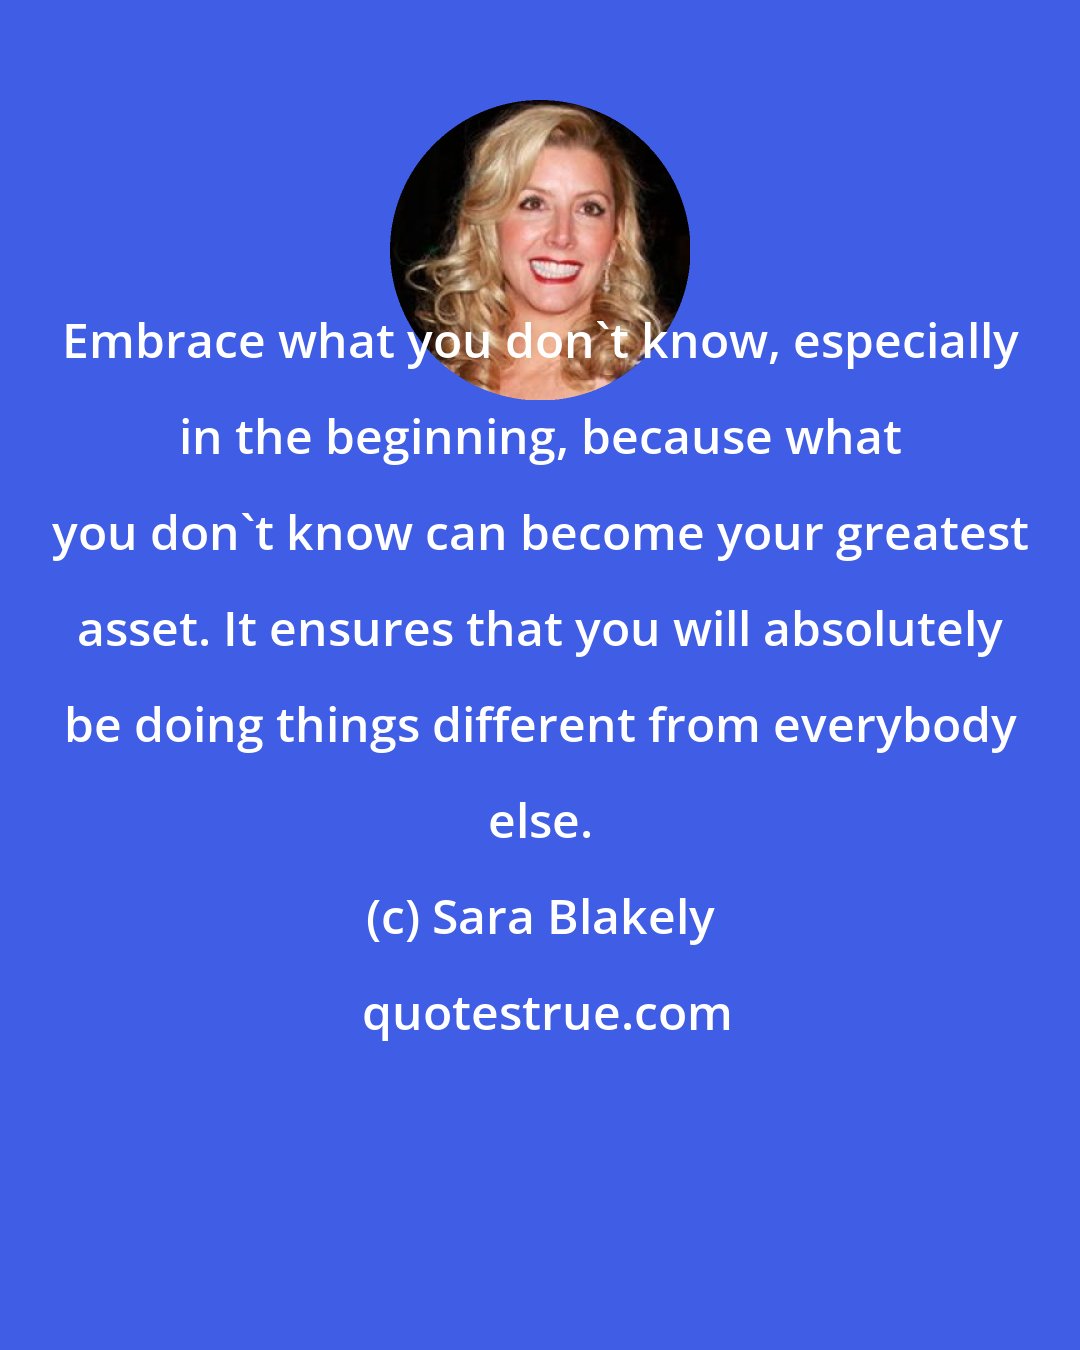 Sara Blakely: Embrace what you don't know, especially in the beginning, because what you don't know can become your greatest asset. It ensures that you will absolutely be doing things different from everybody else.